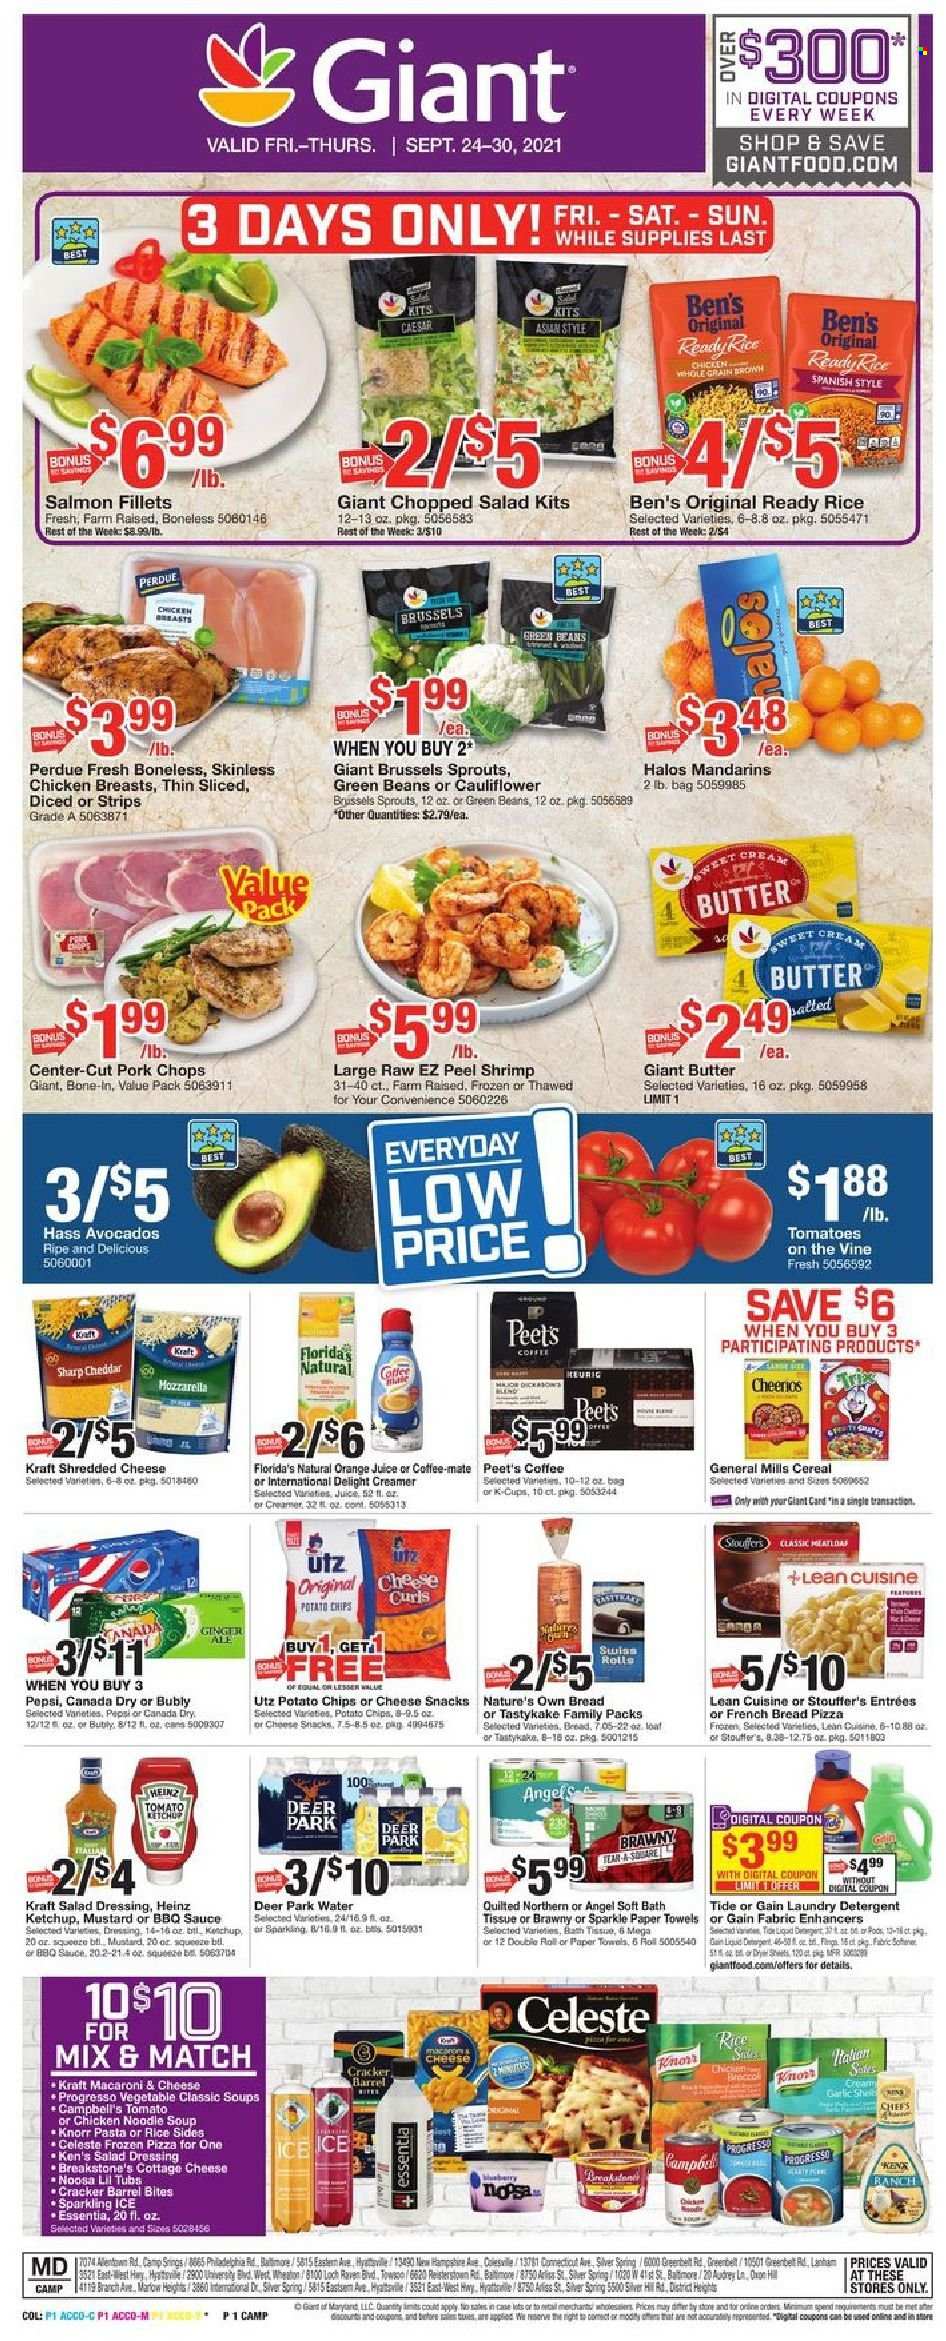 thumbnail - Giant Food Flyer - 09/24/2021 - 09/30/2021 - Sales products - bread, french bread, garlic, green beans, brussel sprouts, chopped salad, avocado, mandarines, salmon, salmon fillet, shrimps, Campbell's, macaroni & cheese, pizza, soup, Knorr, noodles cup, noodles, Progresso, Lean Cuisine, Perdue®, Kraft®, cottage cheese, shredded cheese, Coffee-Mate, butter, creamer, strips, Stouffer's, Celeste, snack, crackers, Florida's Natural, potato chips, Heinz, cereals, Cheerios, BBQ sauce, mustard, salad dressing, ketchup, dressing, Canada Dry, ginger ale, Pepsi, orange juice, juice, coffee capsules, K-Cups, whole chicken, chicken breasts, pork chops, pork meat, bath tissue, Quilted Northern, kitchen towels, paper towels, detergent, Gain, Tide, laundry detergent, Nature's Own. Page 1.